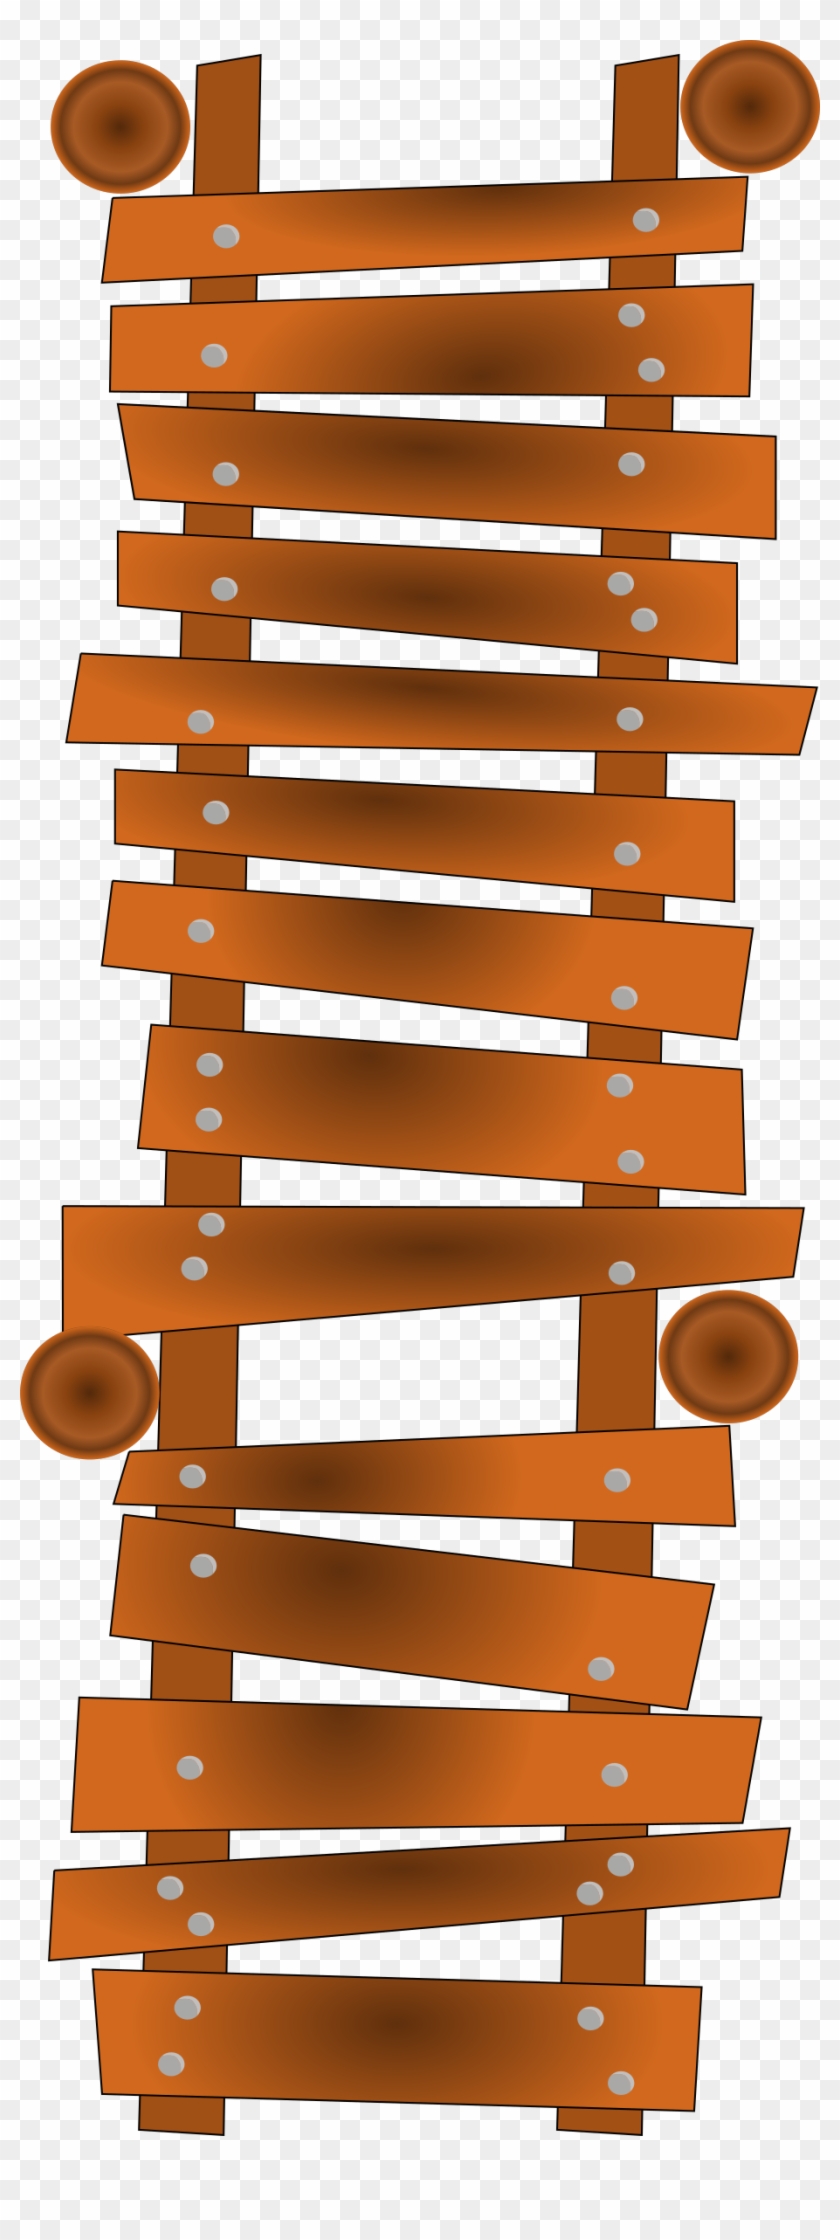 Awesome Wooden Bridge Clip Art Medium Size With Wooden - Wooden Bridge Top View #401274